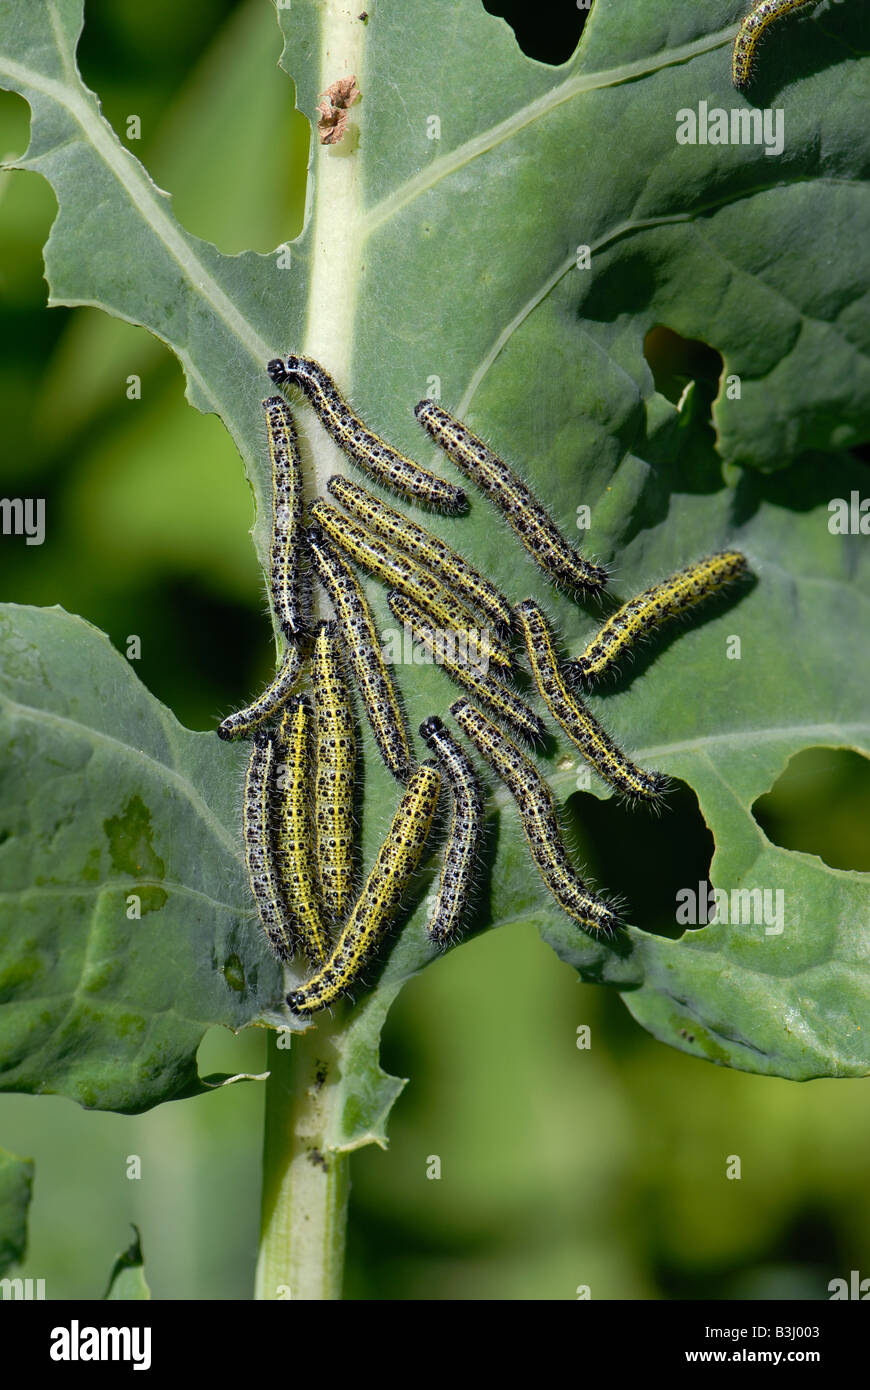 Caterpillars of a large white butterfly Pieris brassicae on severely damaged cabbage leaf Stock Photo